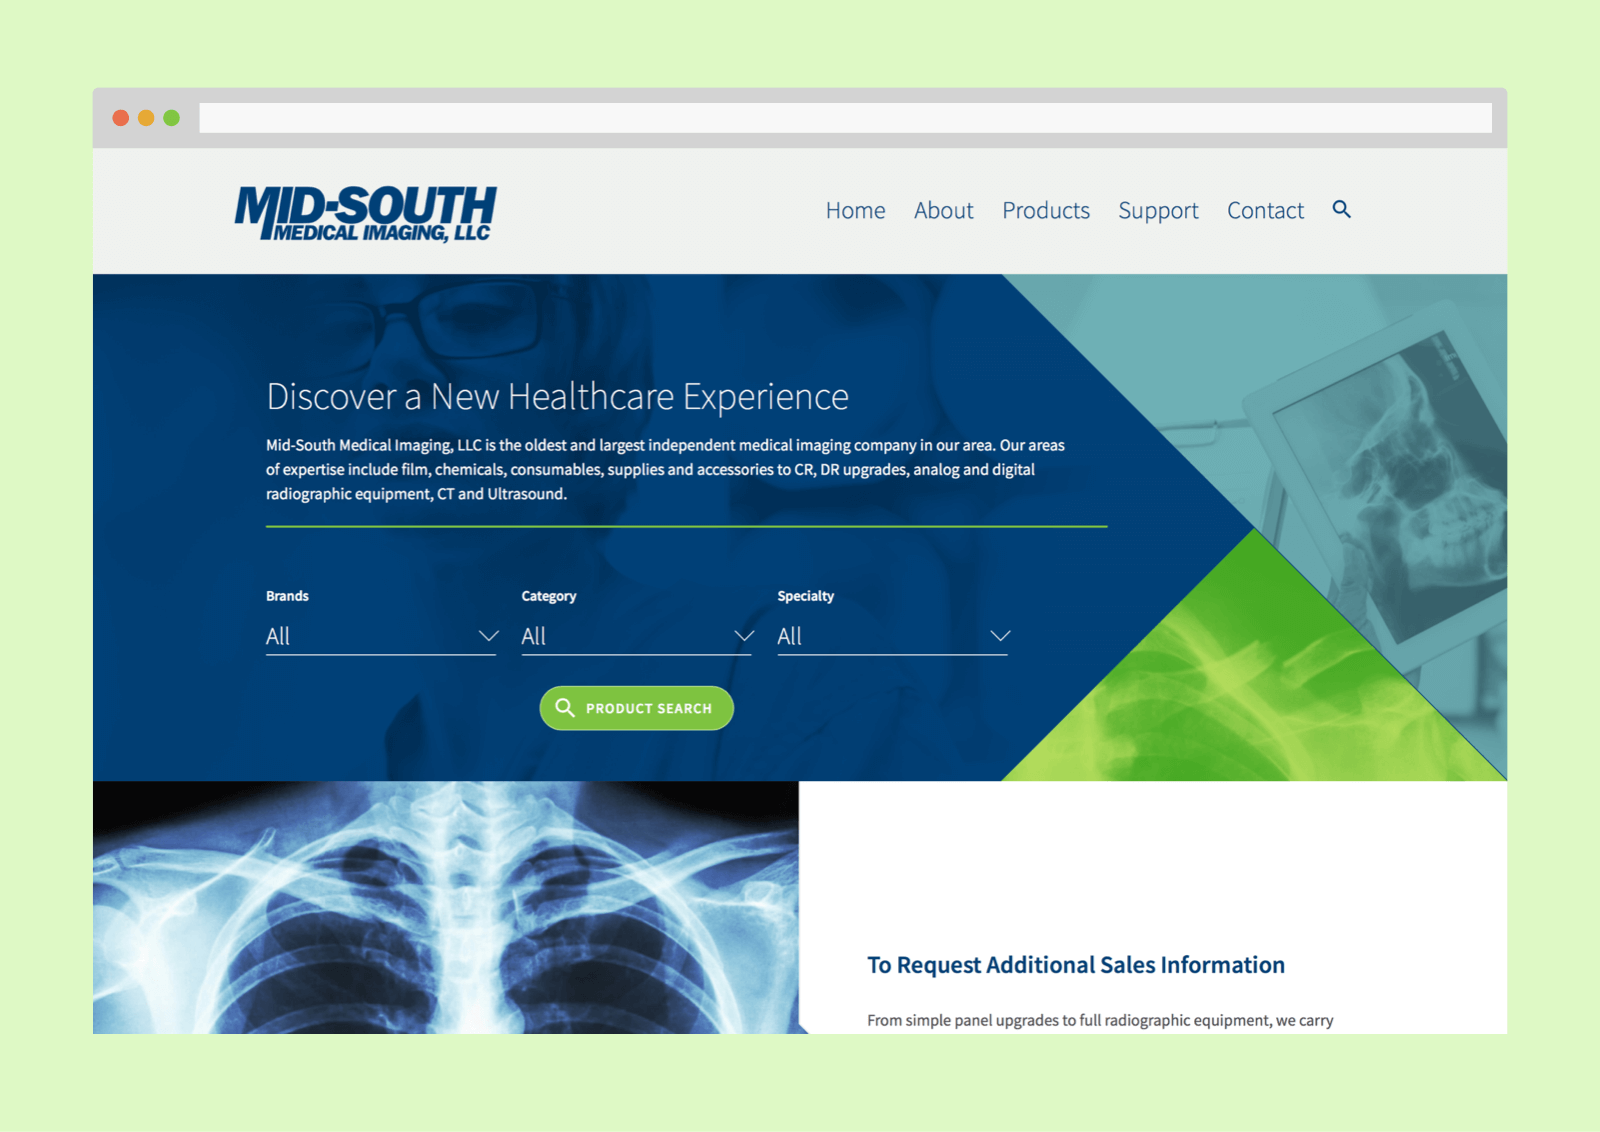 The Mid-South homepage prominently features a product search component